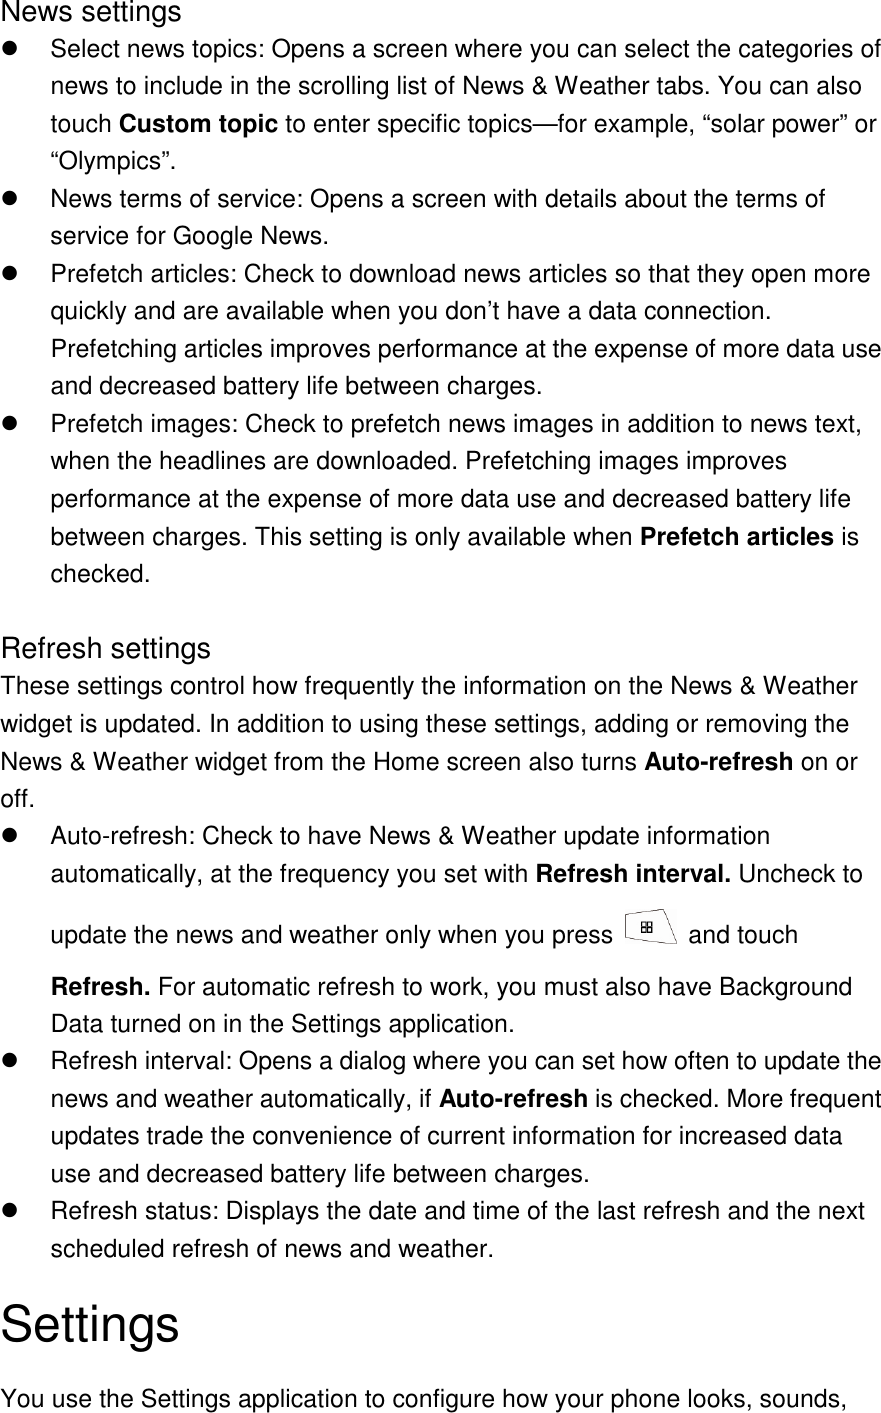 News settings   Select news topics: Opens a screen where you can select the categories of news to include in the scrolling list of News &amp; Weather tabs. You can also touch Custom topic to enter specific topics—for example, “solar power” or “Olympics”.     News terms of service: Opens a screen with details about the terms of service for Google News.   Prefetch articles: Check to download news articles so that they open more quickly and are available when you don’t have a data connection. Prefetching articles improves performance at the expense of more data use and decreased battery life between charges.     Prefetch images: Check to prefetch news images in addition to news text, when the headlines are downloaded. Prefetching images improves performance at the expense of more data use and decreased battery life between charges. This setting is only available when Prefetch articles is checked.  Refresh settings These settings control how frequently the information on the News &amp; Weather widget is updated. In addition to using these settings, adding or removing the News &amp; Weather widget from the Home screen also turns Auto-refresh on or off.     Auto-refresh: Check to have News &amp; Weather update information automatically, at the frequency you set with Refresh interval. Uncheck to update the news and weather only when you press    and touch Refresh. For automatic refresh to work, you must also have Background Data turned on in the Settings application.     Refresh interval: Opens a dialog where you can set how often to update the news and weather automatically, if Auto-refresh is checked. More frequent updates trade the convenience of current information for increased data use and decreased battery life between charges.   Refresh status: Displays the date and time of the last refresh and the next scheduled refresh of news and weather. Settings You use the Settings application to configure how your phone looks, sounds, 